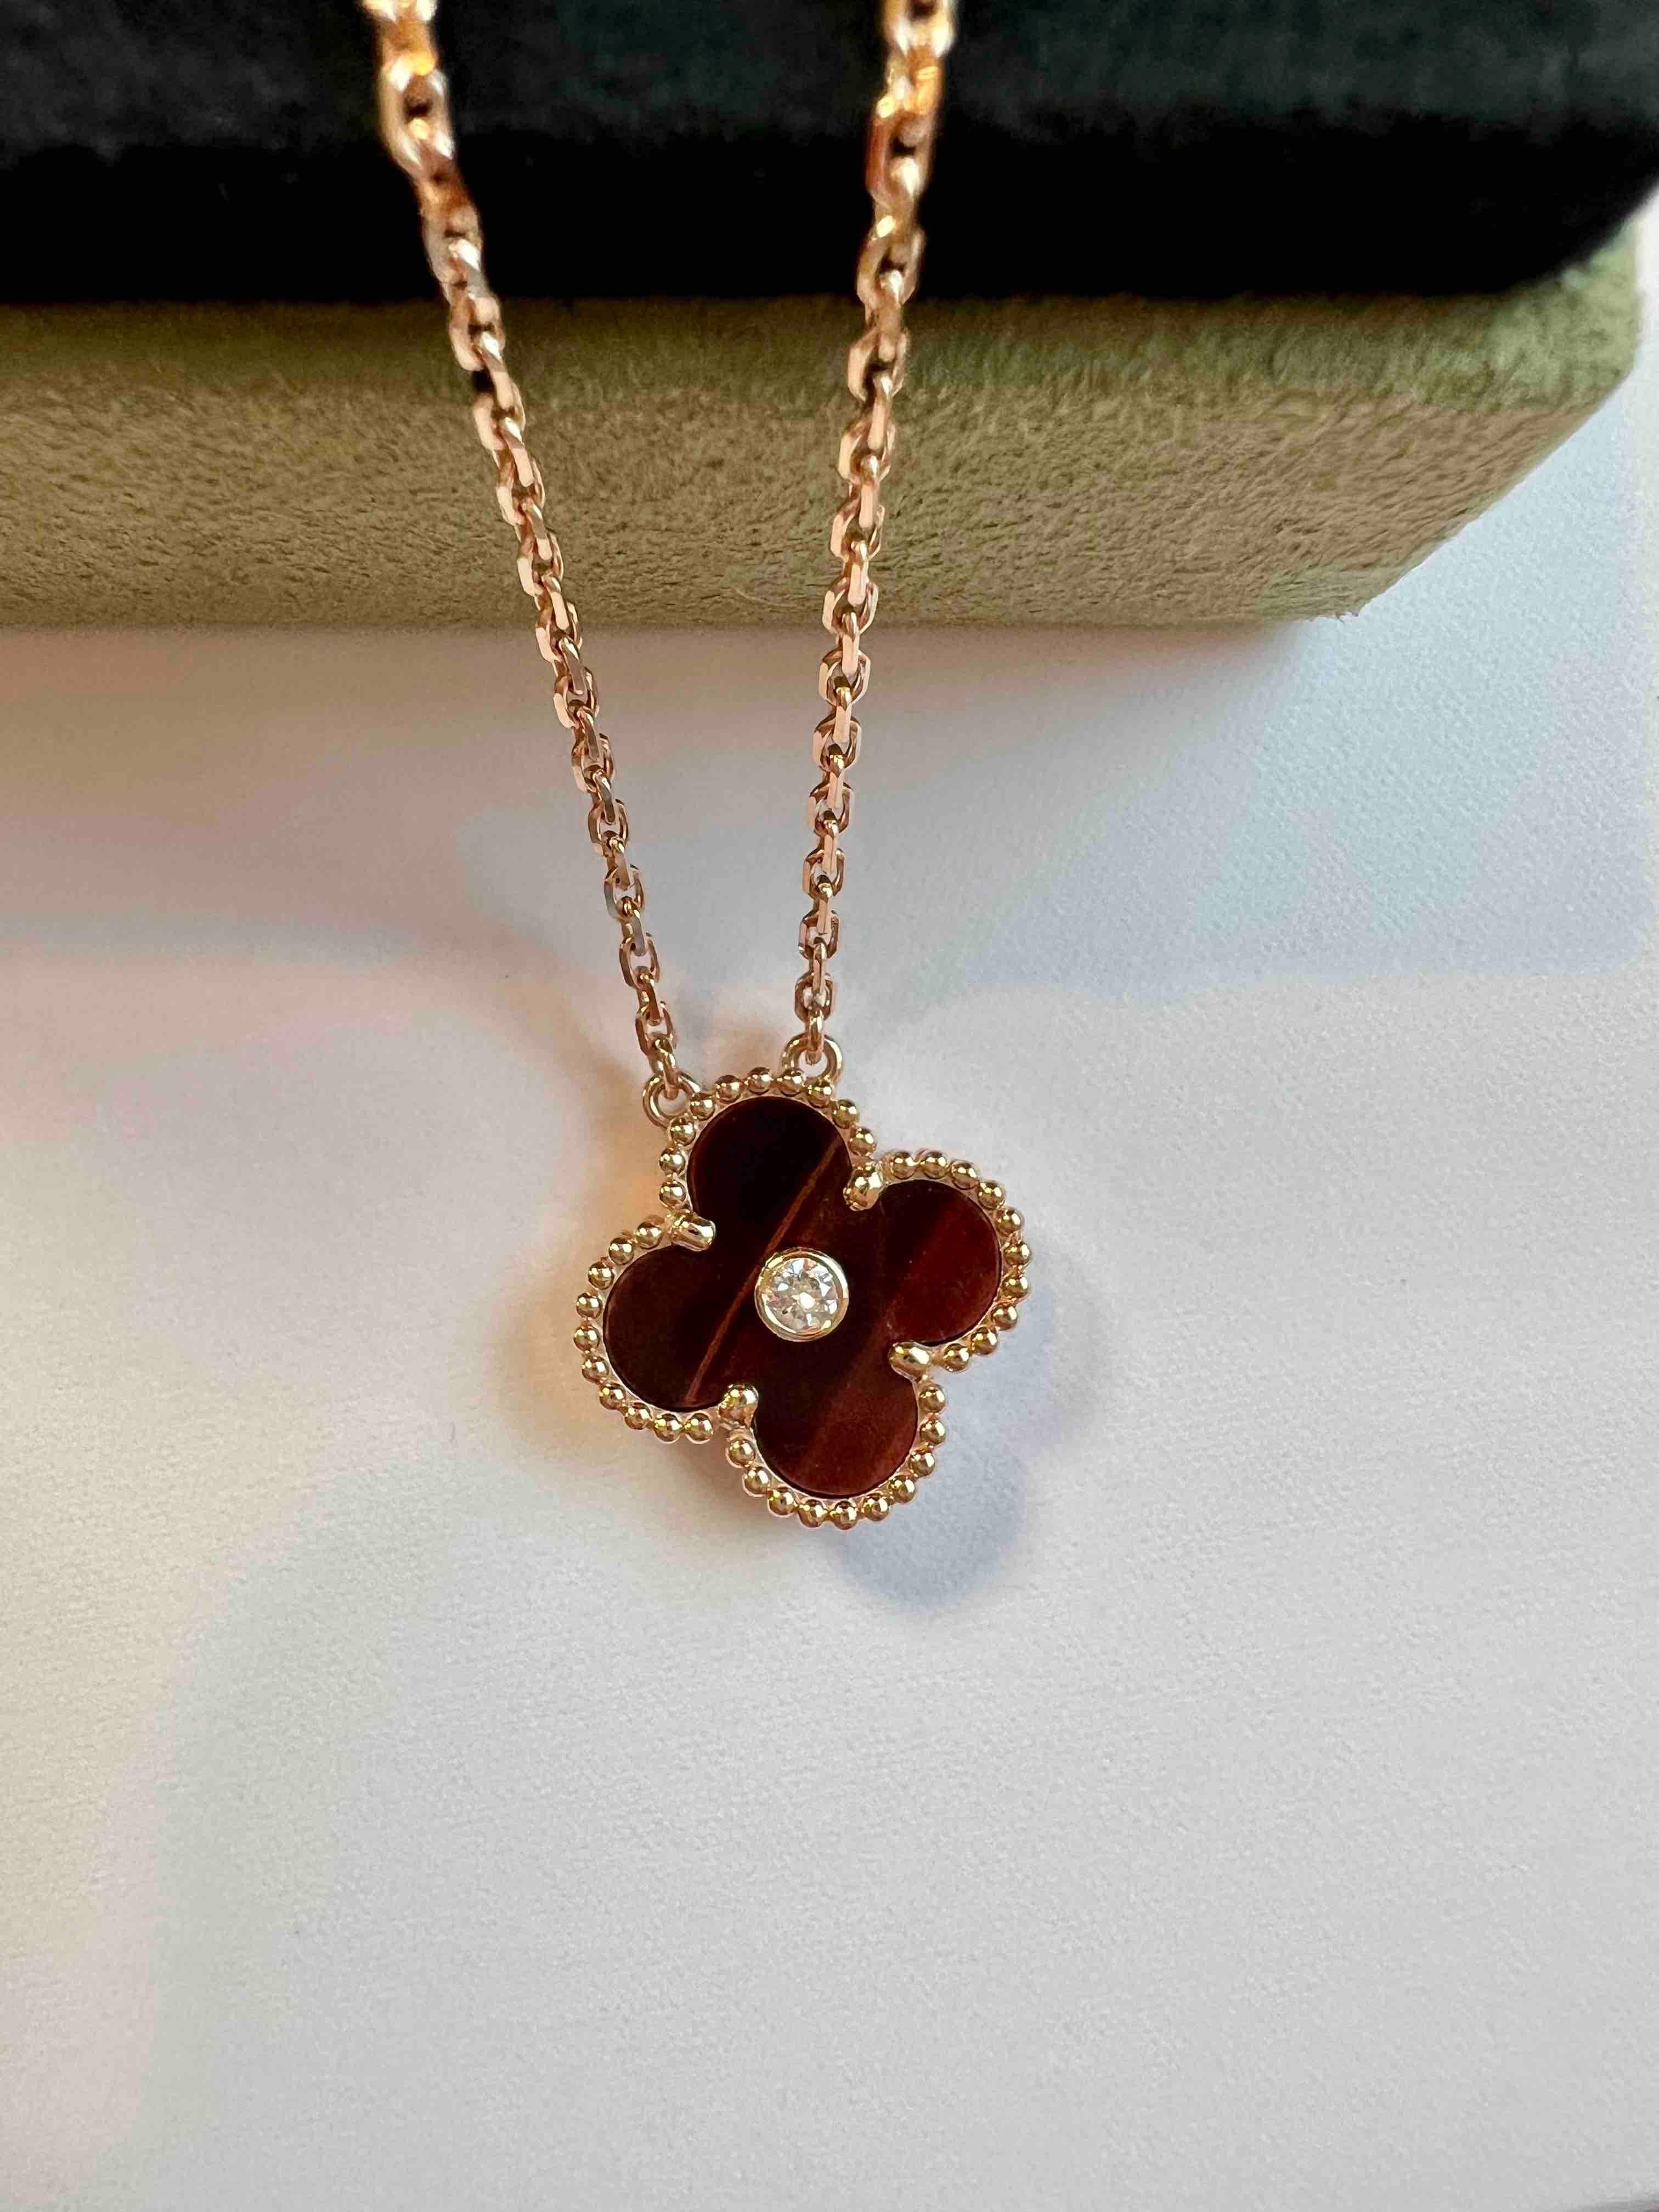 Van Cleef & Arpels 2017 Holiday Pendant of Vintage Alhambra, diamond, tiger eye necklace. Discontinued hard to get on the market. 

Maker: Van Cleef & Arpels

Accessories: Boxes, the original certificate dated 2017, and the necklace.

Condition: